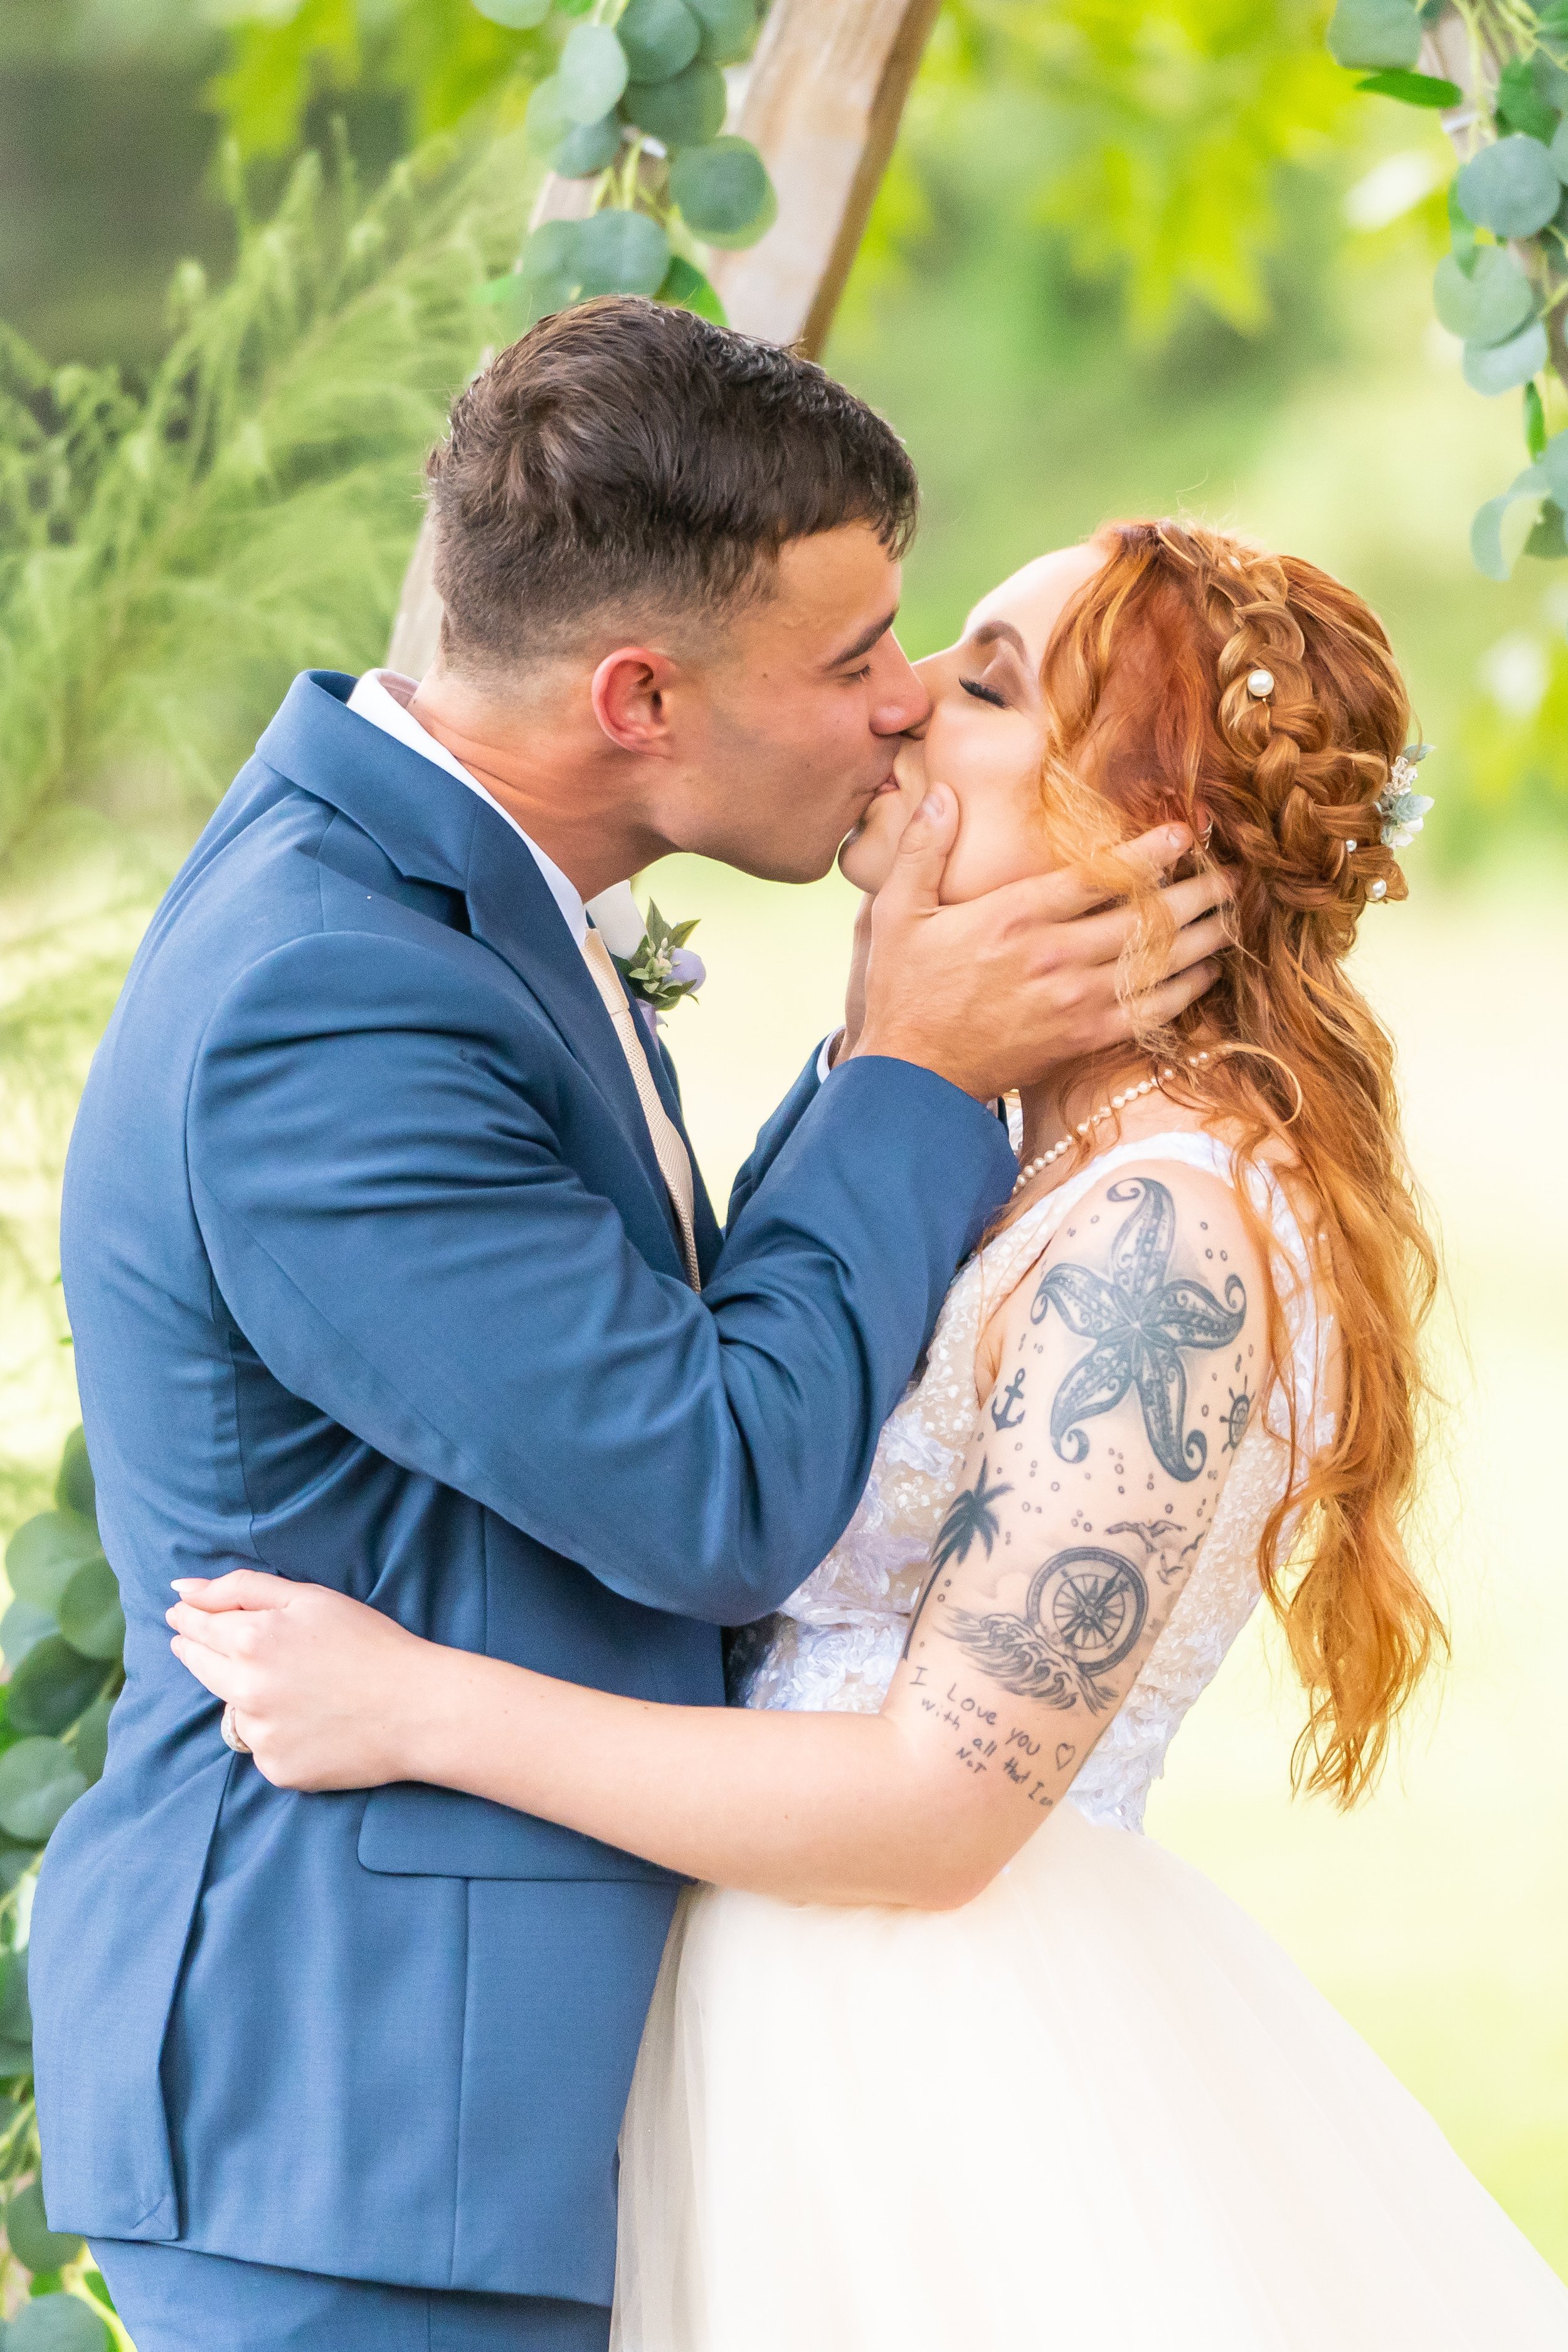 Just-Married-Kiss-Red-Haired-Bride-.jpg